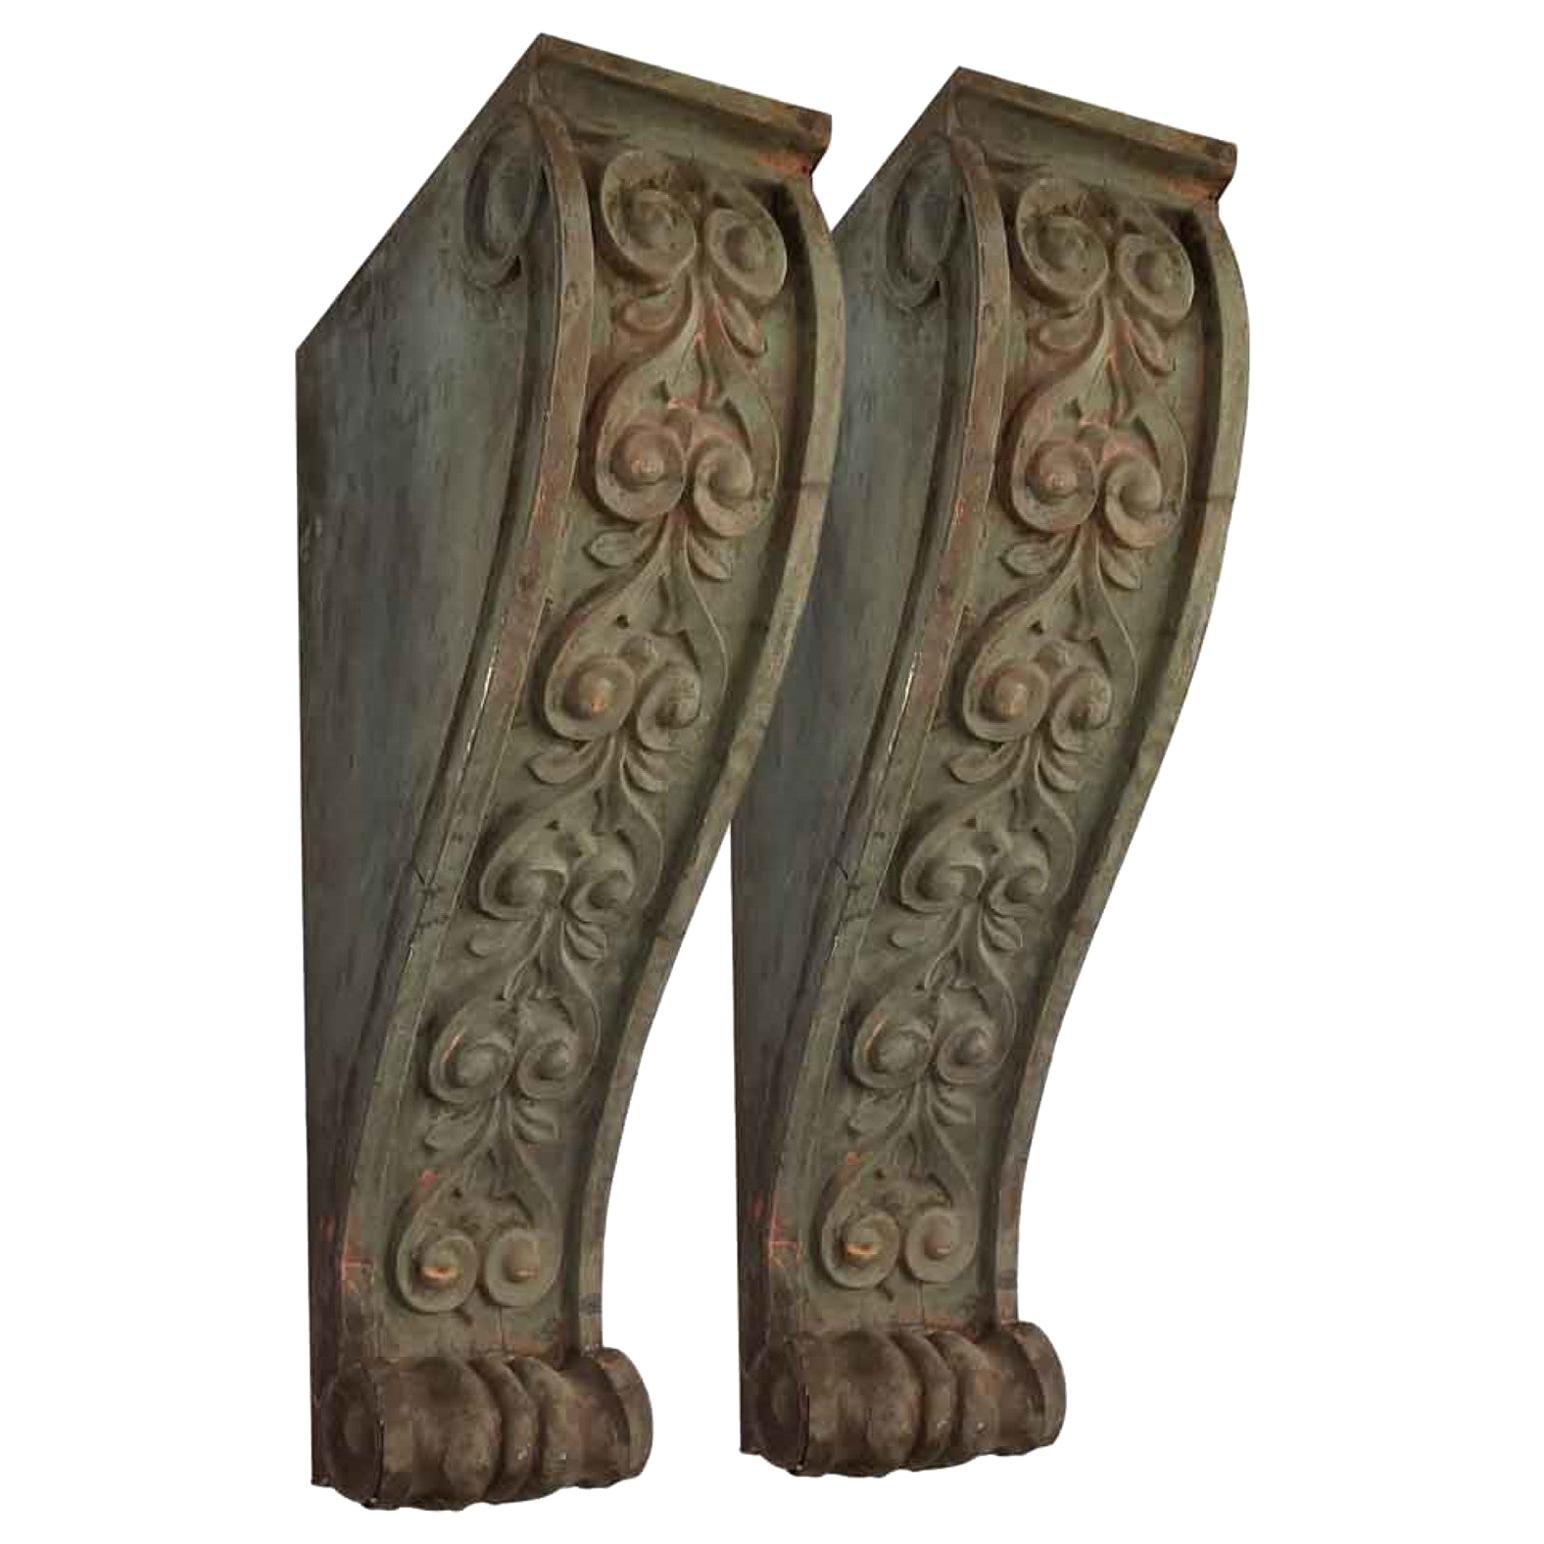 1900s Pair of Copper Corbels from the Prestigious NYC Tribeca Film Building